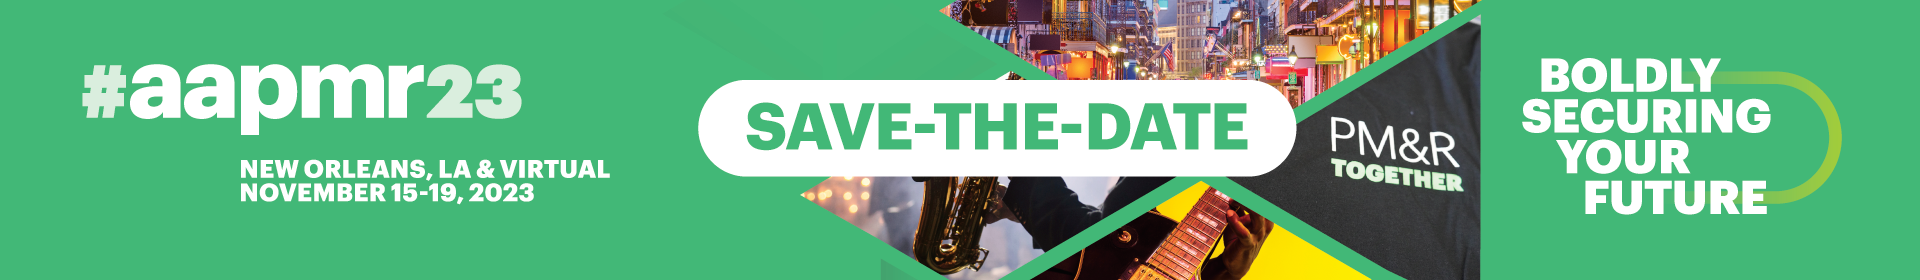 Save the Date for #AAPMR23! November 15-19, 2023 in New Orleans